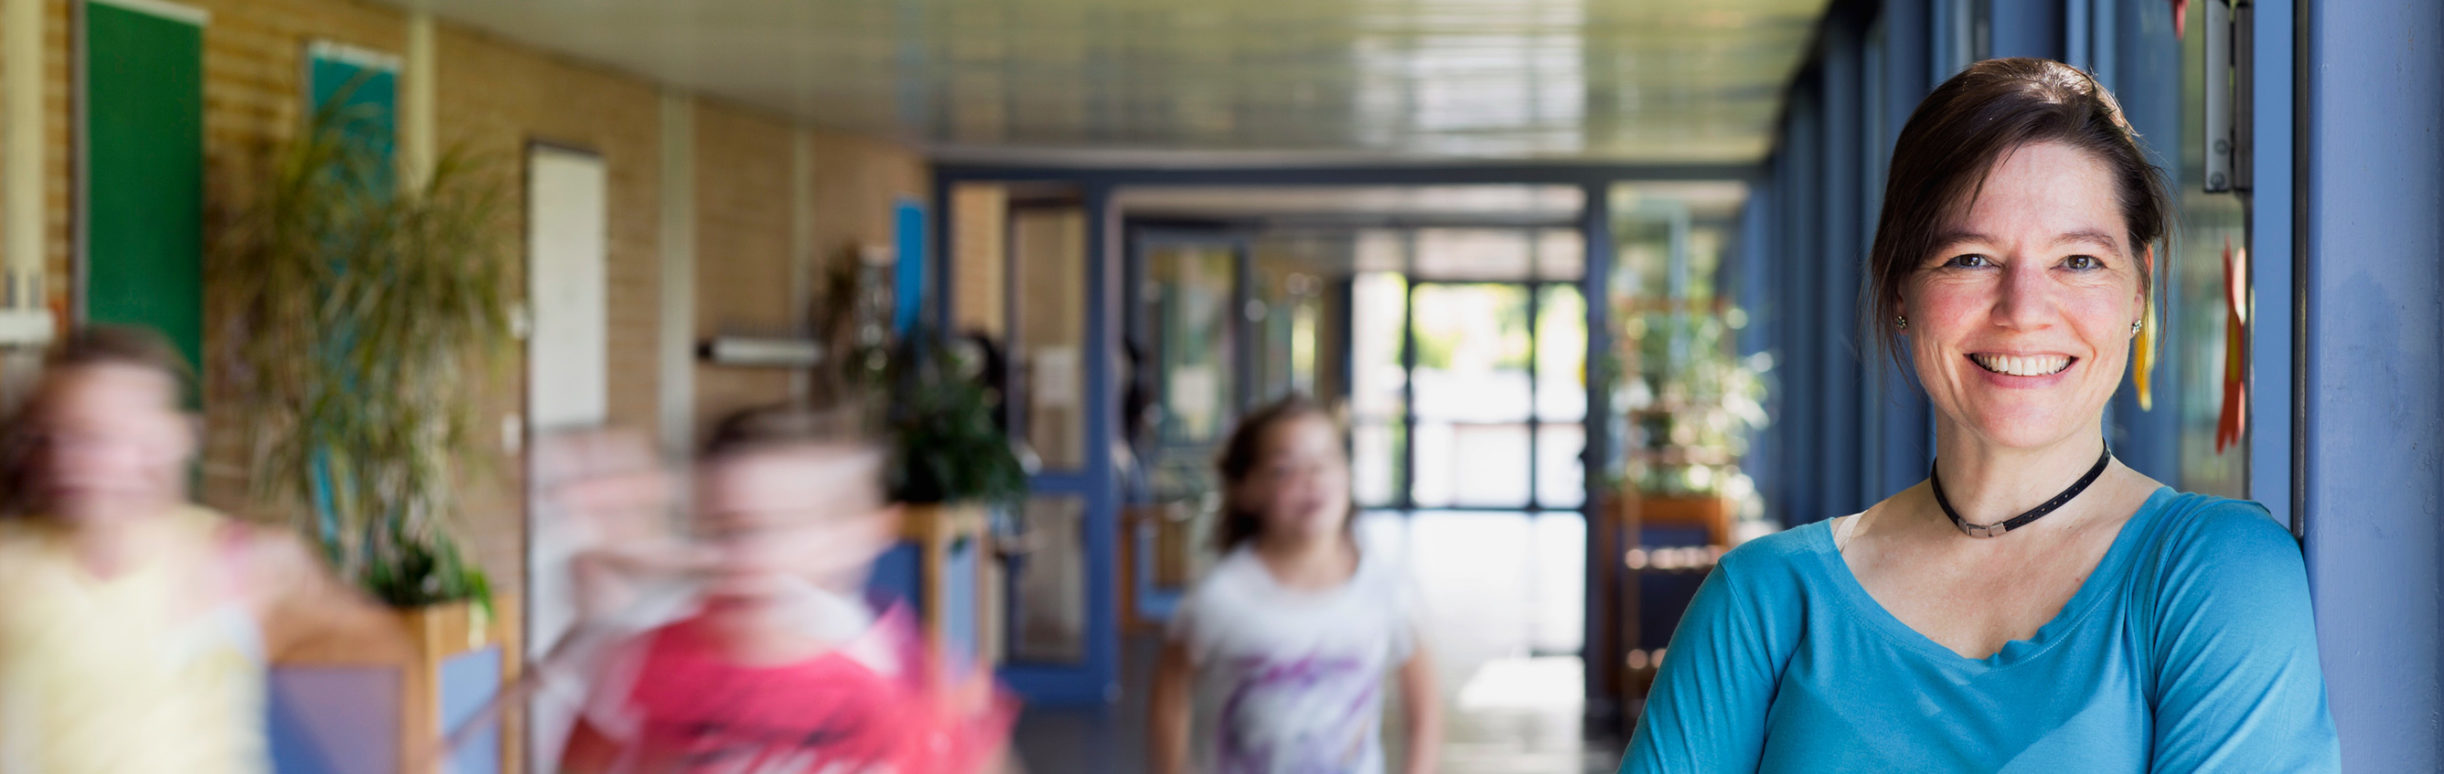 Woman standing in a school hallway with children running by.